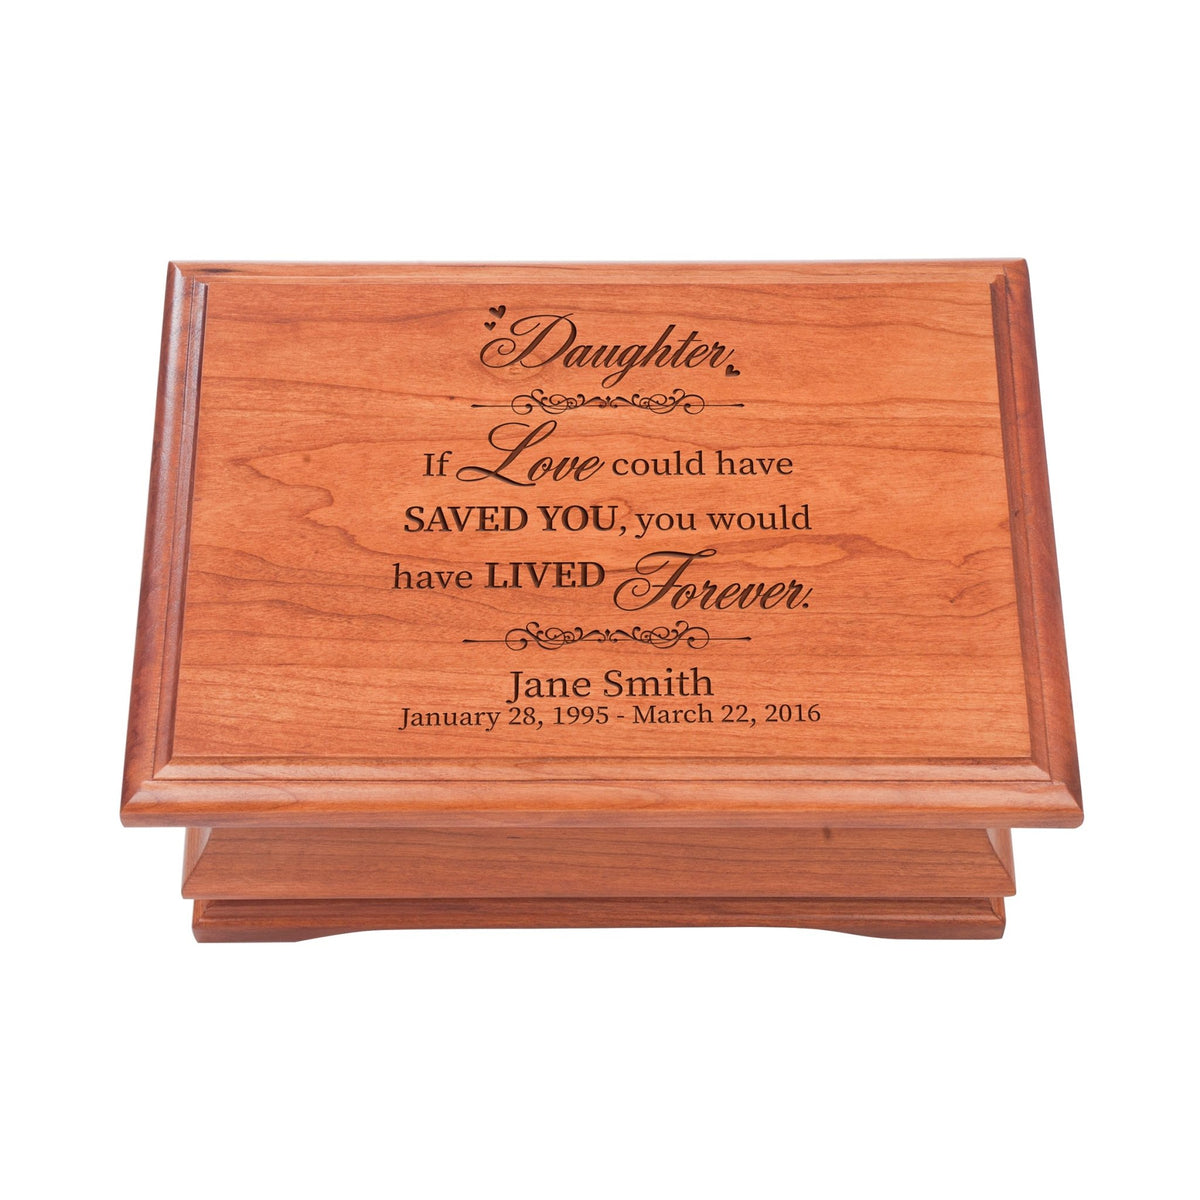 Personalized Wooden Memorial Jewelry Box Organizer 11.5x8.25 – If Love Could Have - LifeSong Milestones